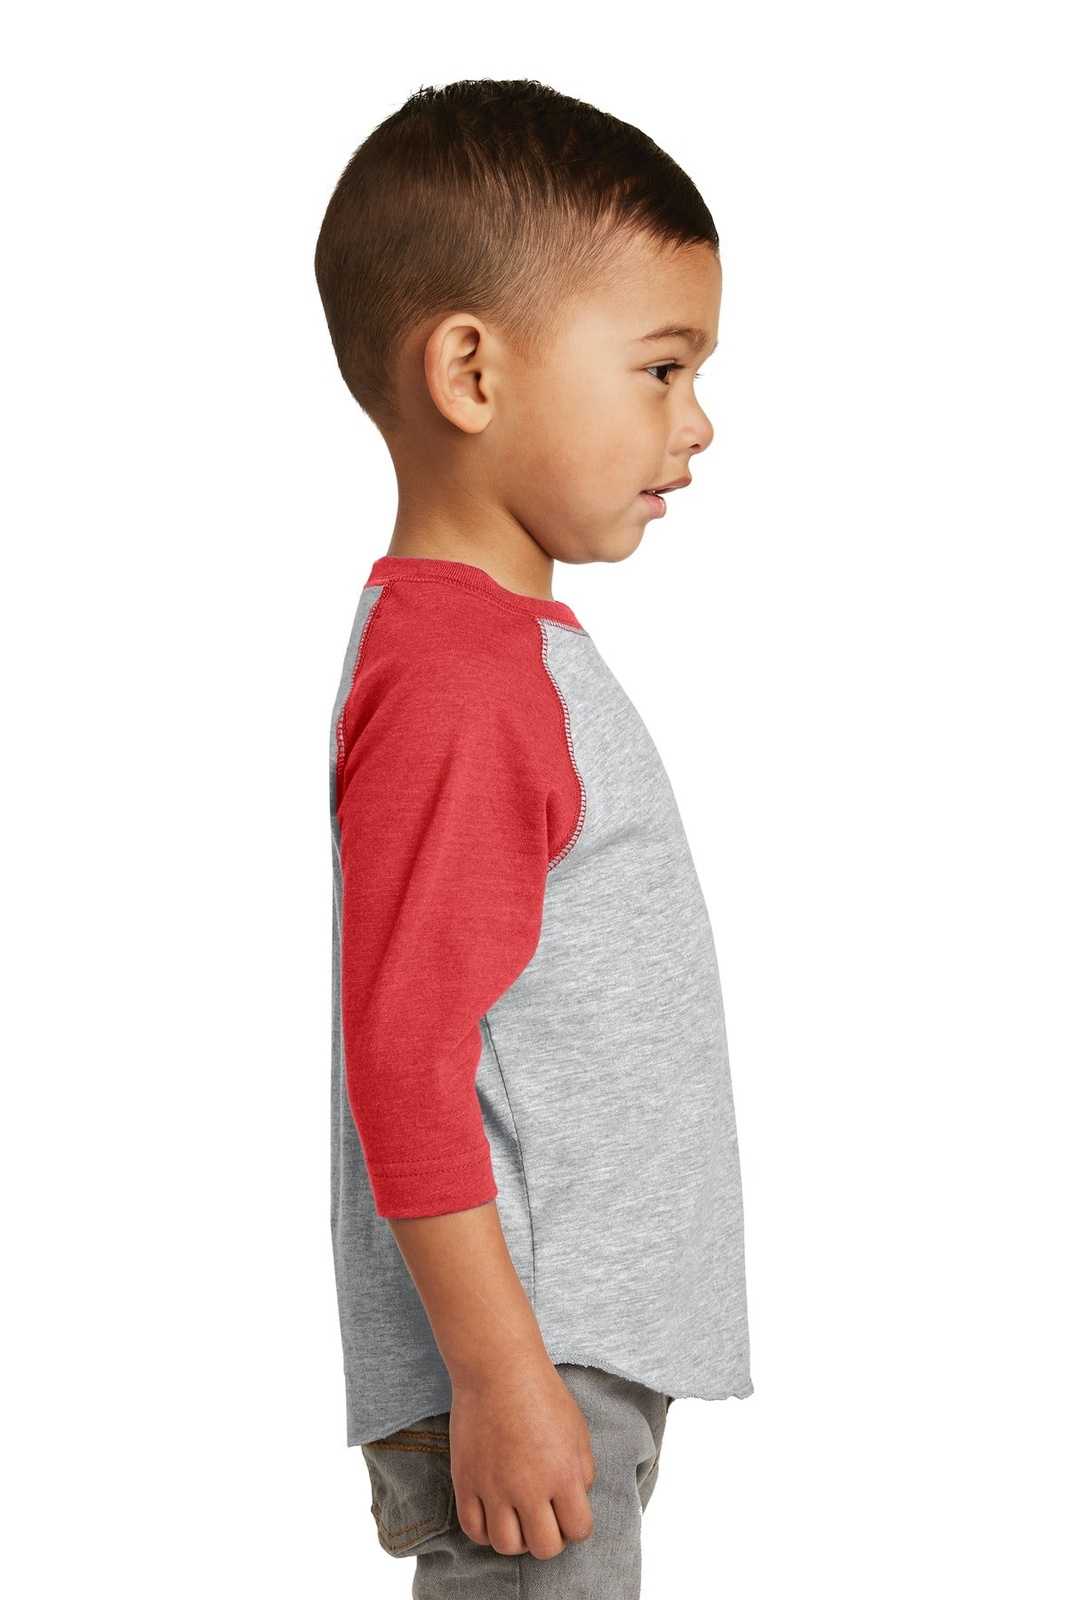 Rabbit Skins 3330 Toddler Baseball Fine Jersey Tee - Vintage Heather Vintage Red - HIT a Double